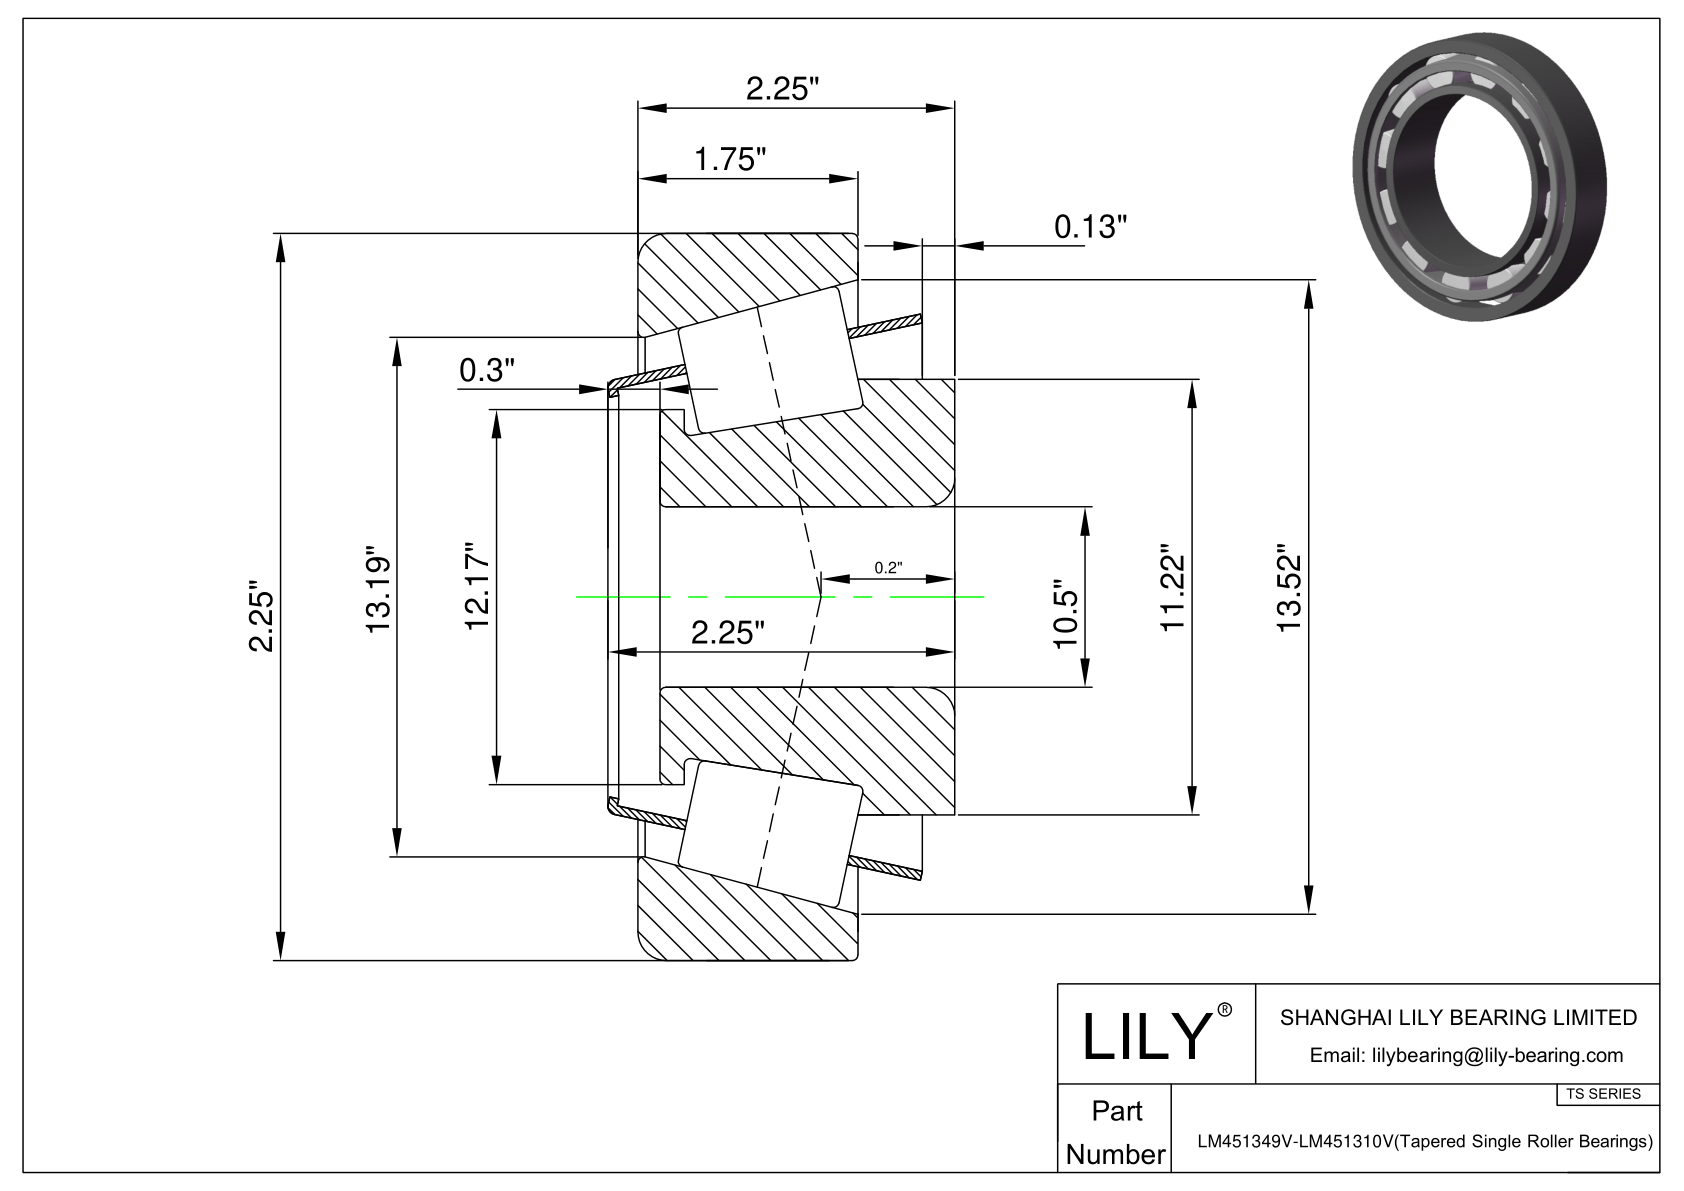 LM451349V-LM451310V TS (Tapered Single Roller Bearings) (Imperial) cad drawing